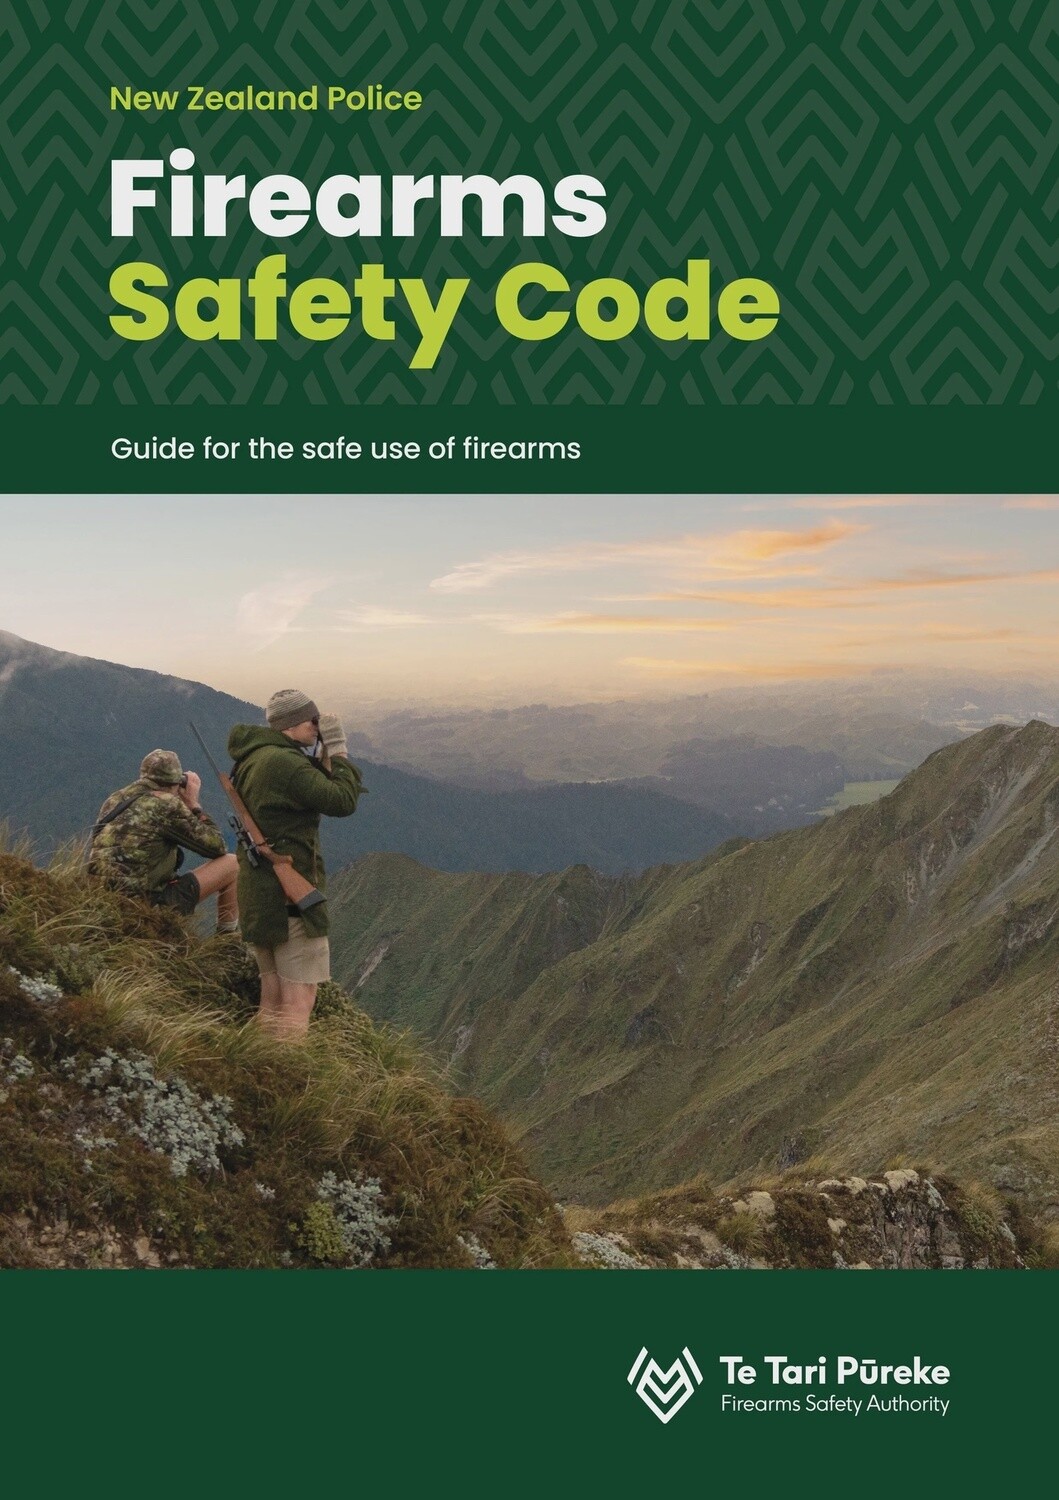 New Zealand Police Firearms Safety Code